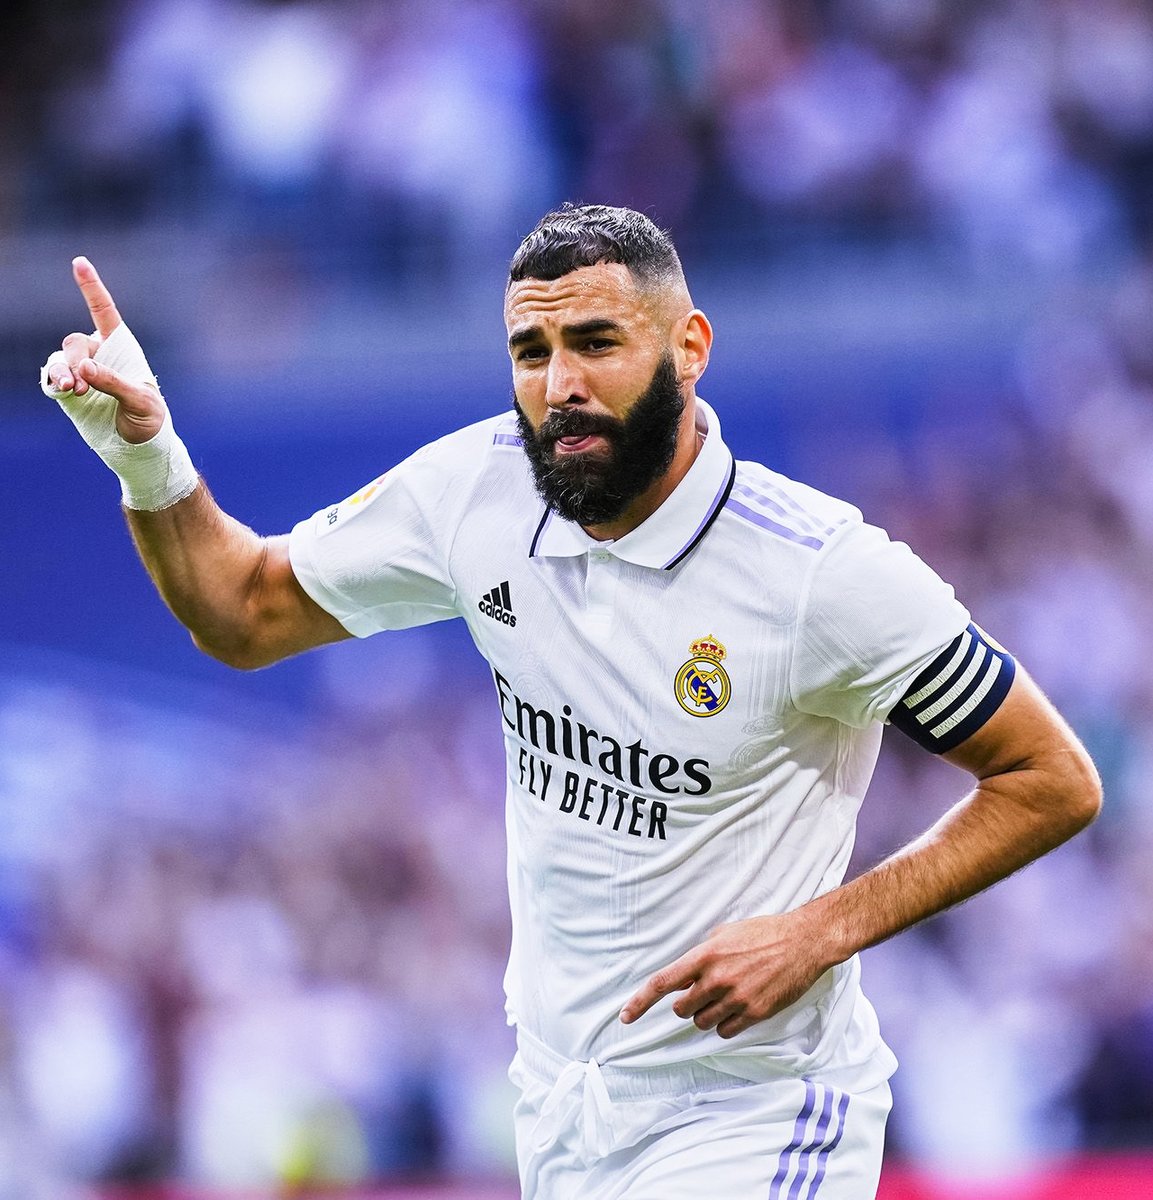 Karim Benzema — one of the greatest strikers of all time — is signing with Saudi club Al-Ittihad, per @FabrizioRomano.

His contract: 3 years, $643 million.